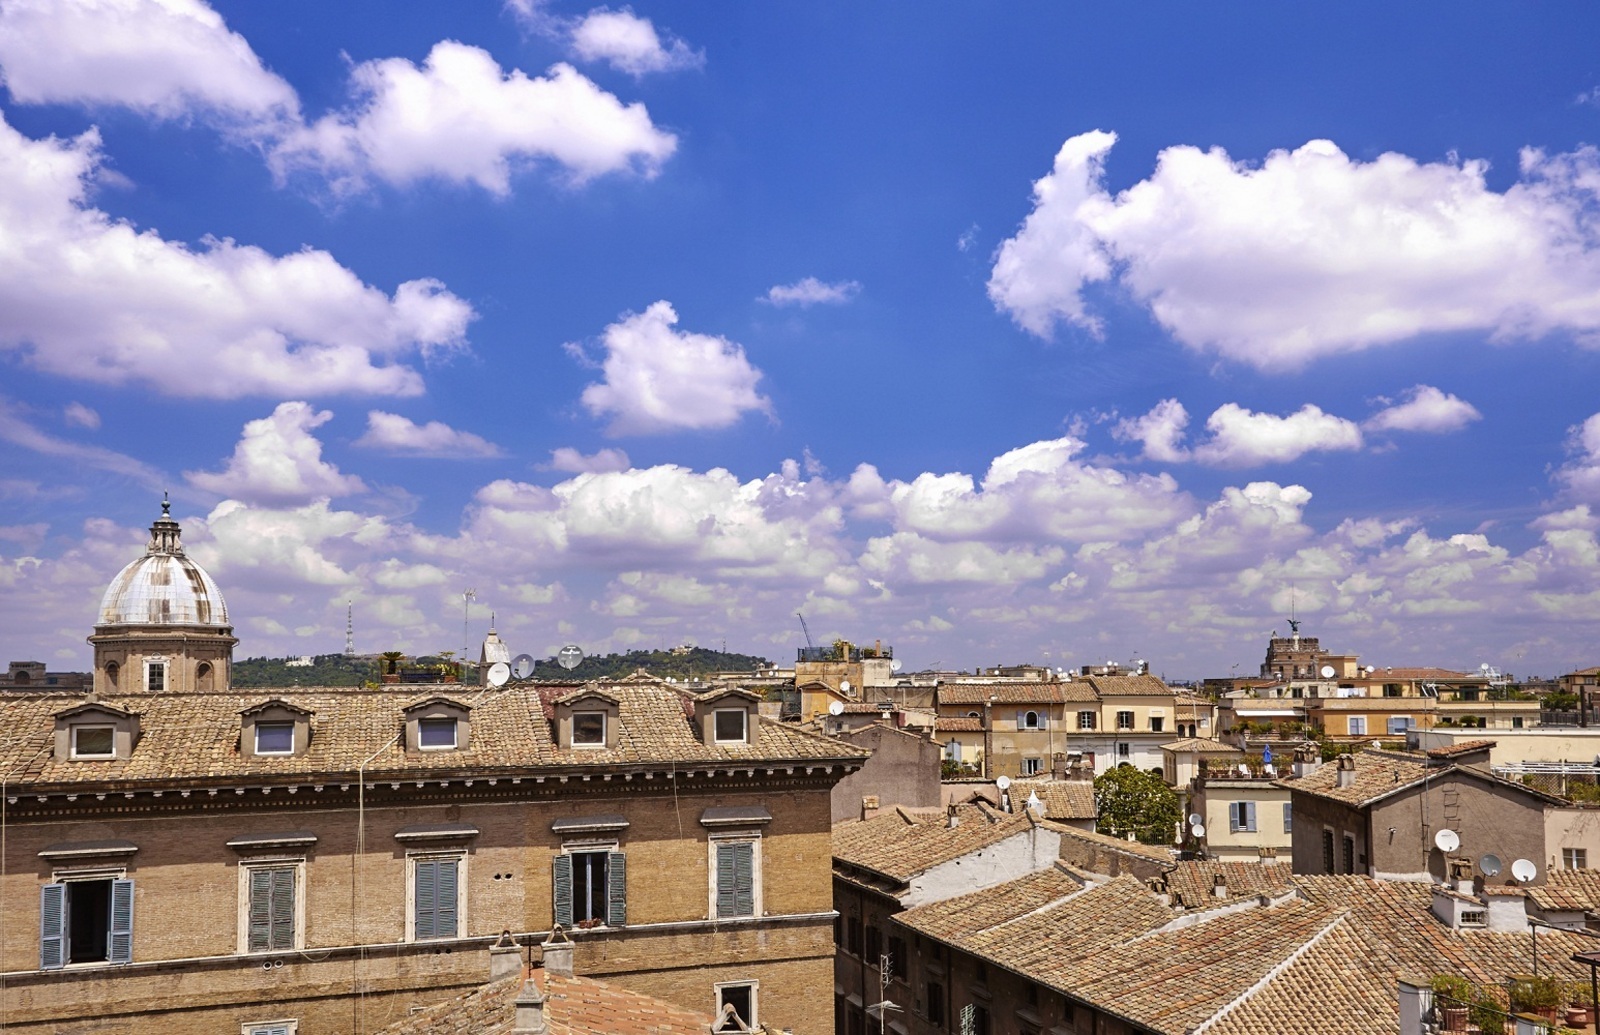 1436168617_Roofs_of_Rome.jpg